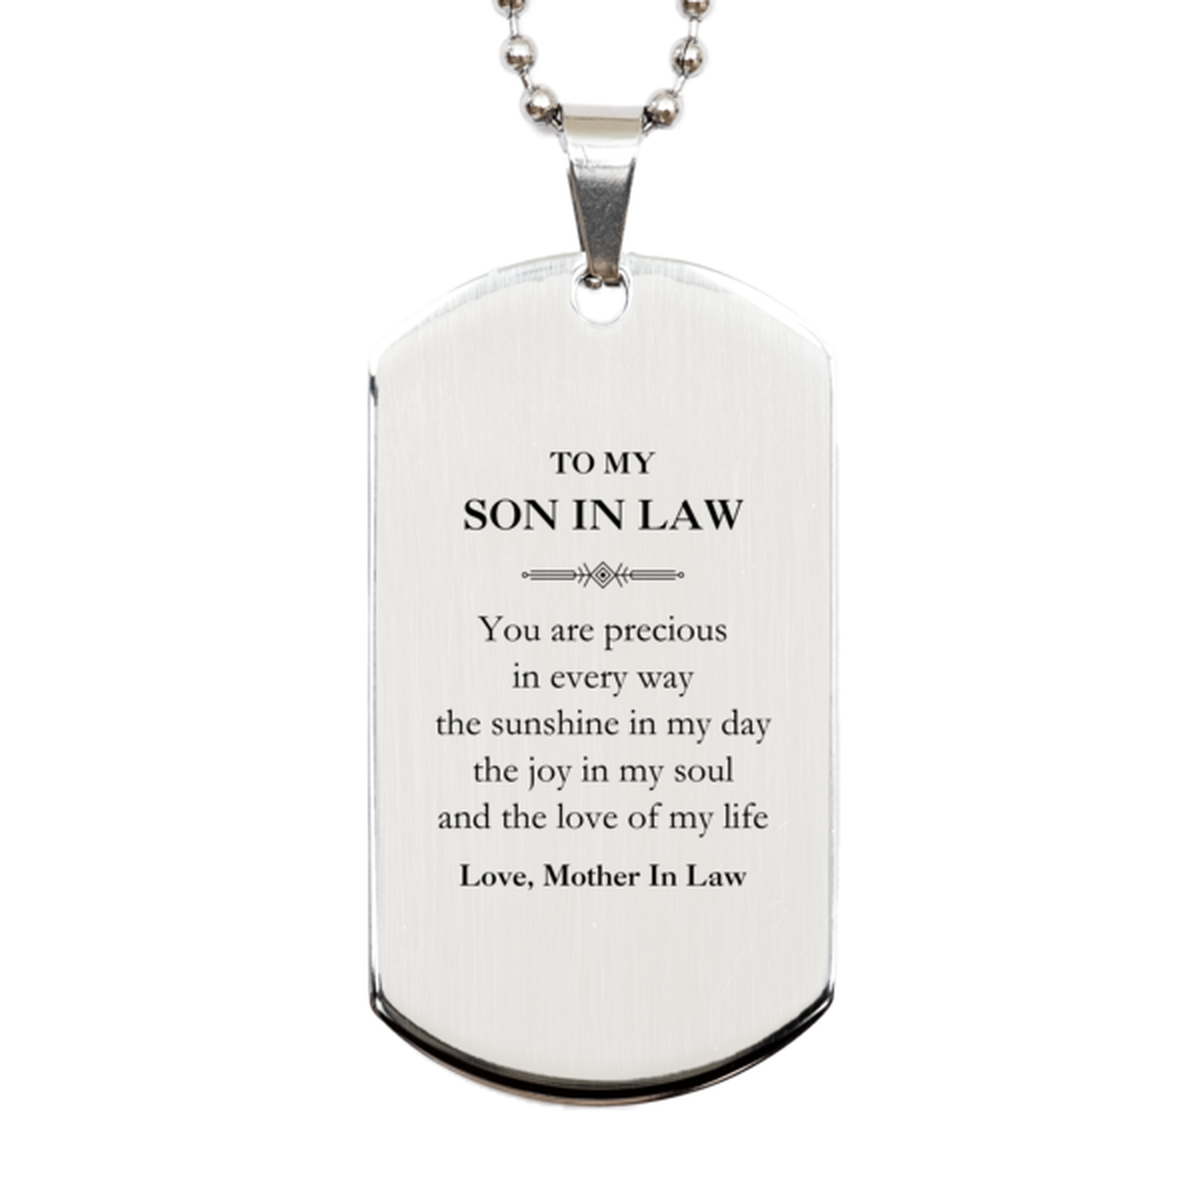 Graduation Gifts for Son In Law Silver Dog Tag Present from Mother In Law, Christmas Son In Law Birthday Gifts Son In Law You are precious in every way the sunshine in my day. Love, Mother In Law